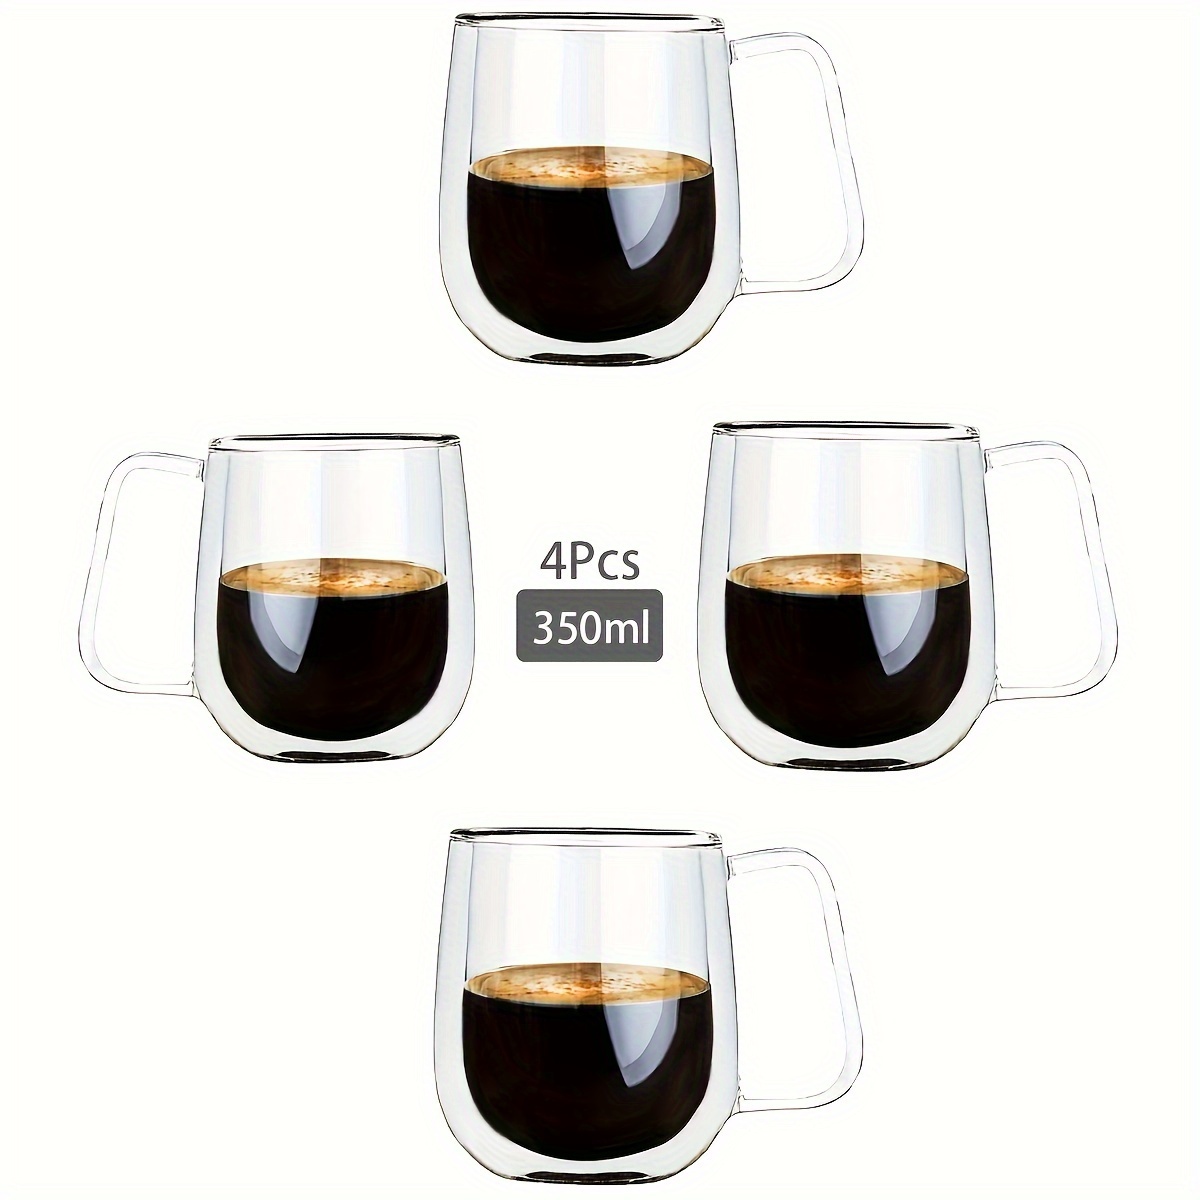 

4pcs, Glass Coffee Mugs, 250ml/350ml Double-walled Espresso Coffee Cups, Heat Insulated Water Cups, Summer Winter Drinkware, Birthday Gifts